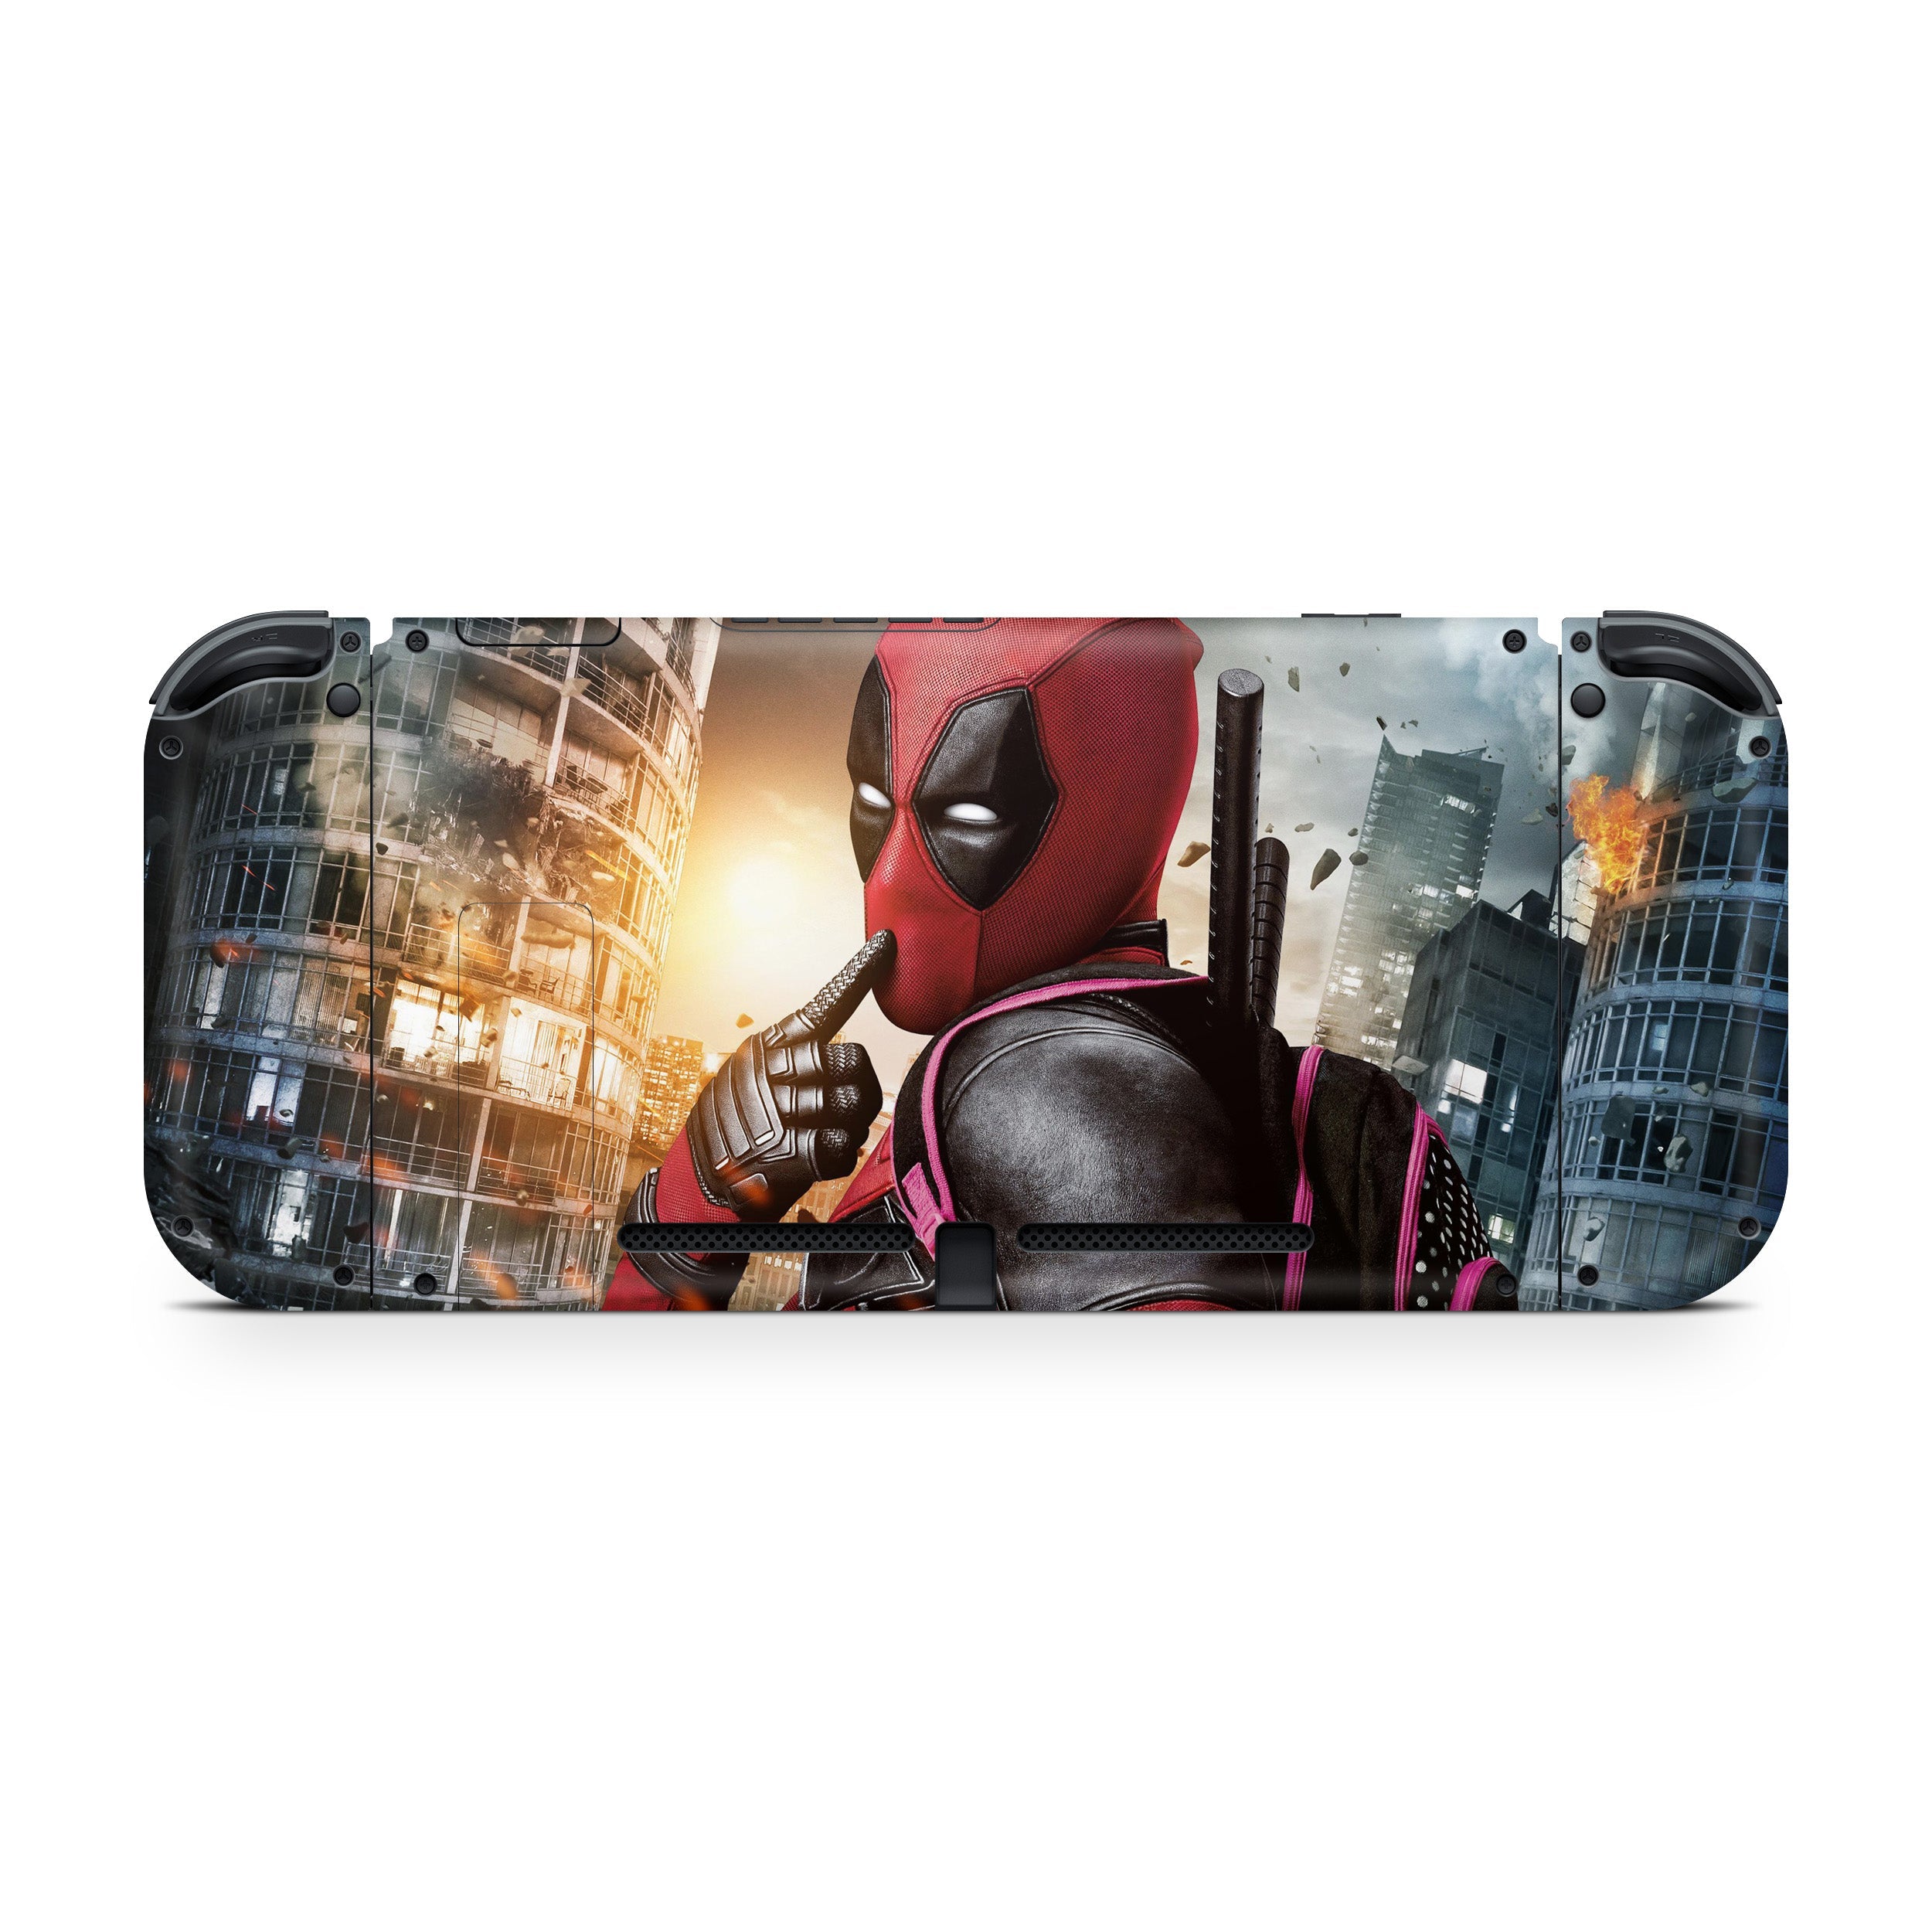 A video game skin featuring a Marvel Dead Pool design for the Nintendo Switch.